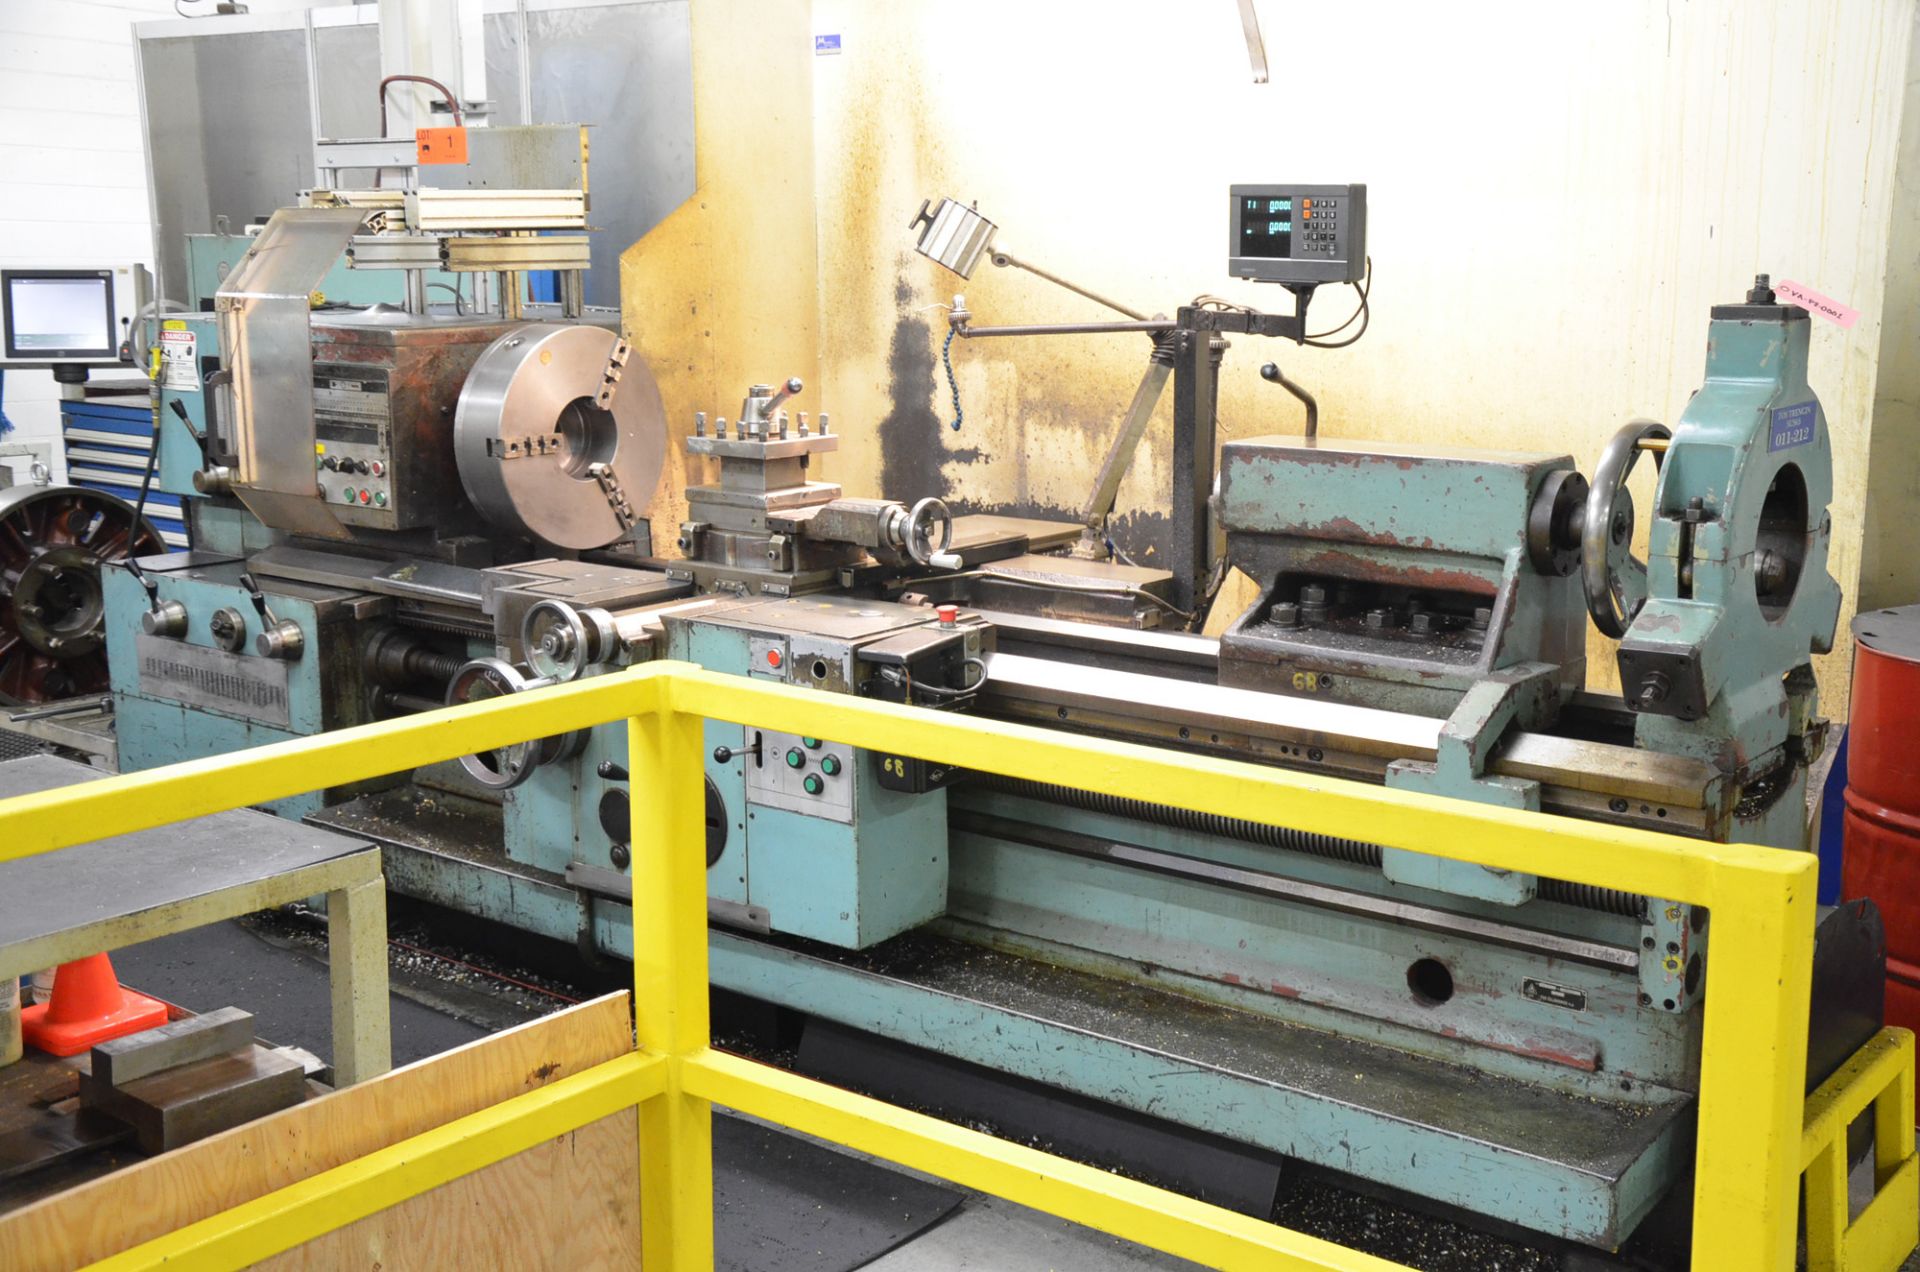 TOS SUS63 ENGINE LATHE WITH 28" SWING, 85" BETWEEN CENTERS, 19.5" 3-JAW CHUCK, SPEEDS TO 1,120